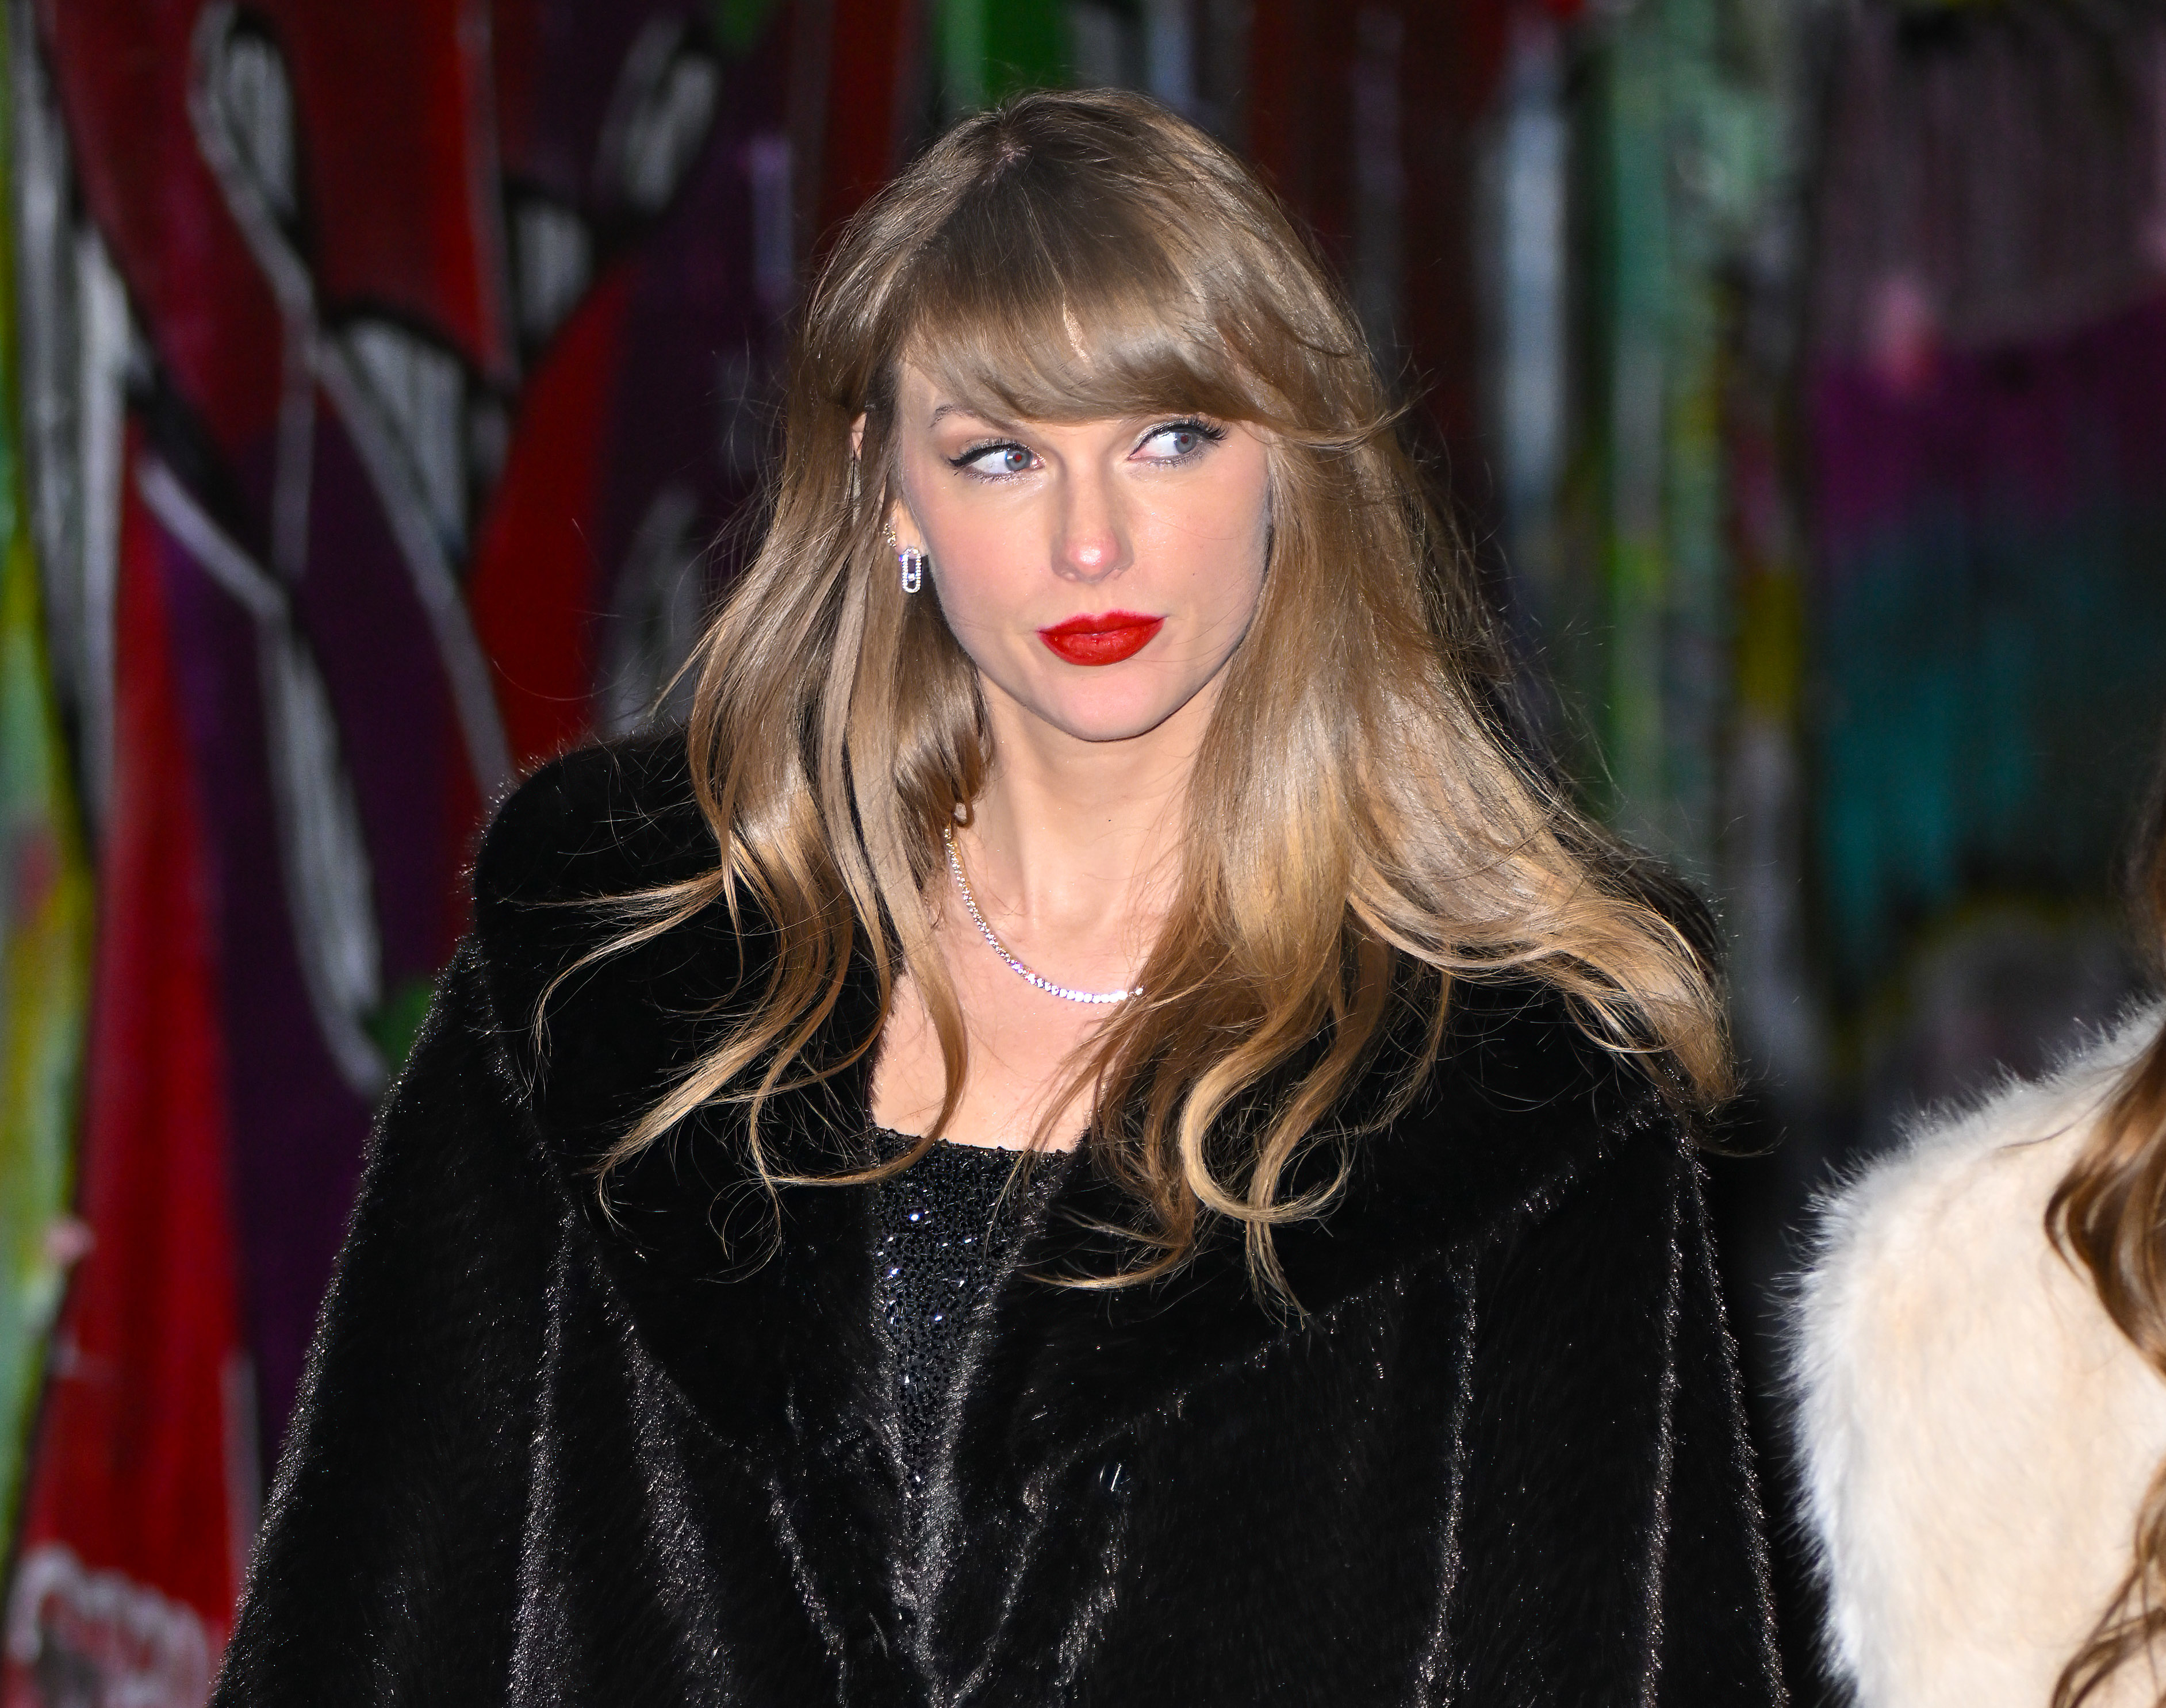 Taylor Swift Addresses Ongoing Questions About Her Sexuality - Parade